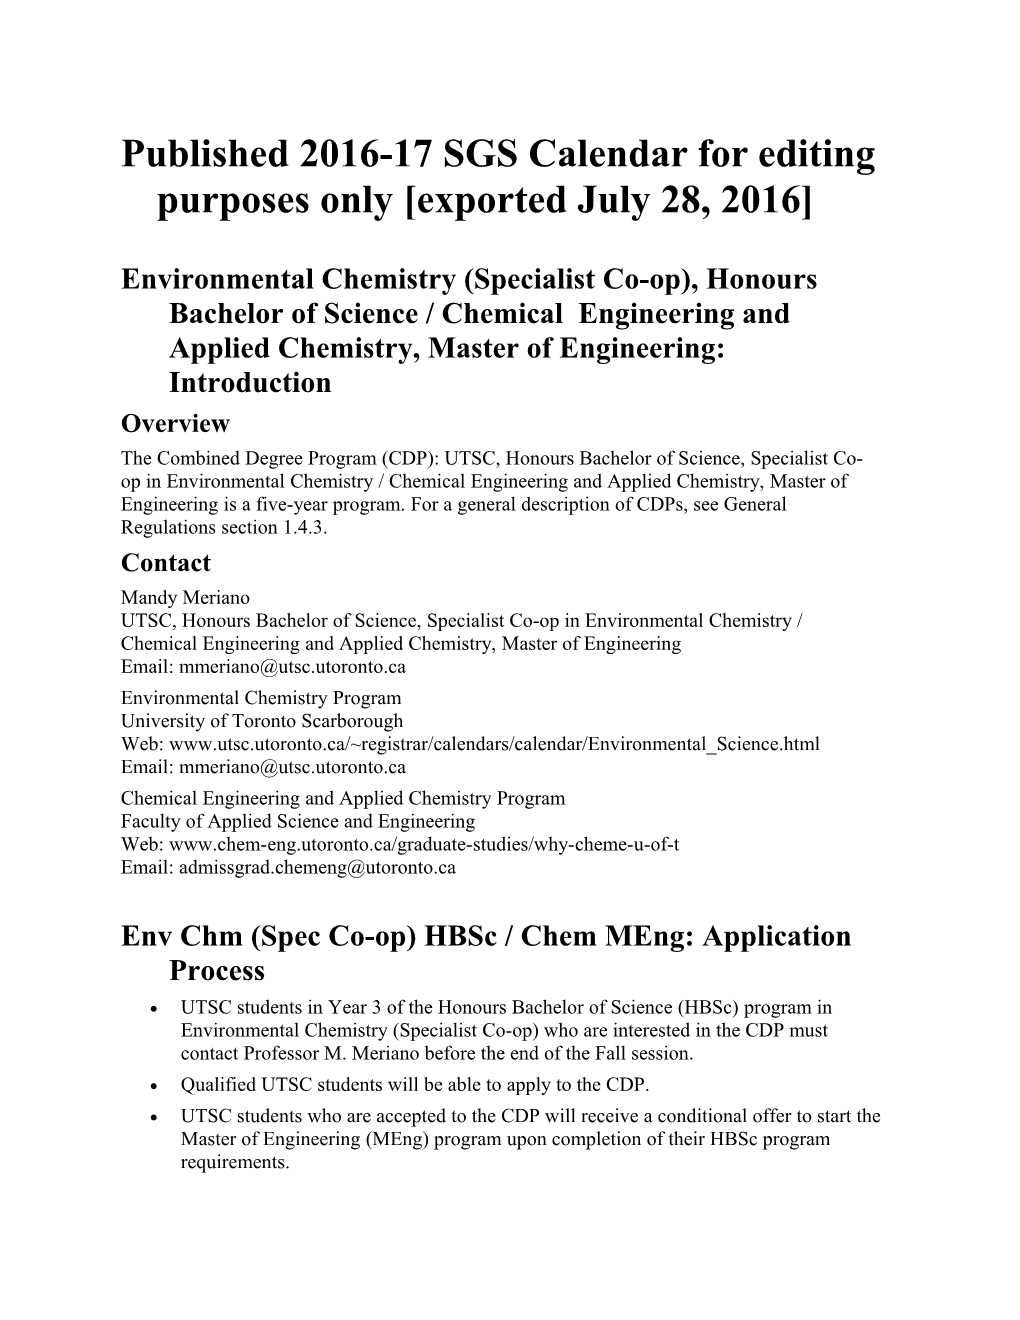 Environmental Chemistry (Specialist Co-Op), Honours Bachelor of Science / Chemical Engineering